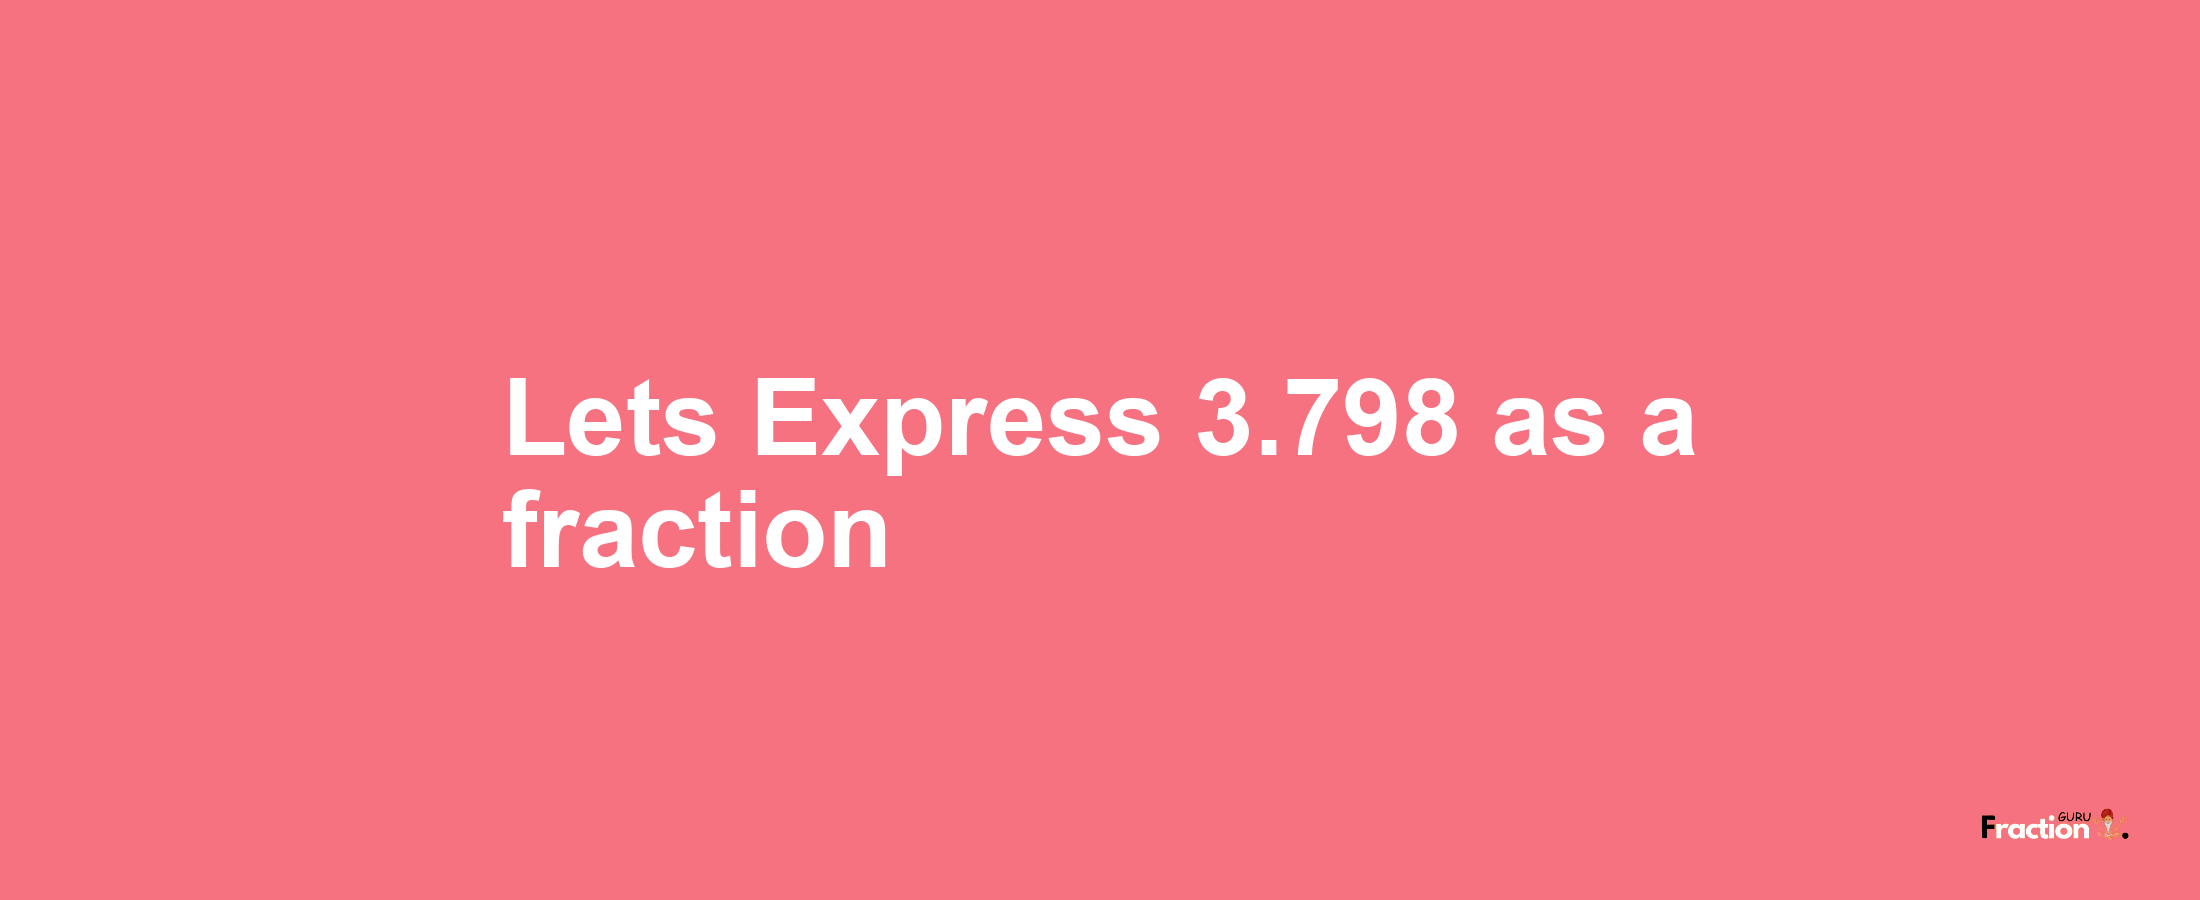 Lets Express 3.798 as afraction